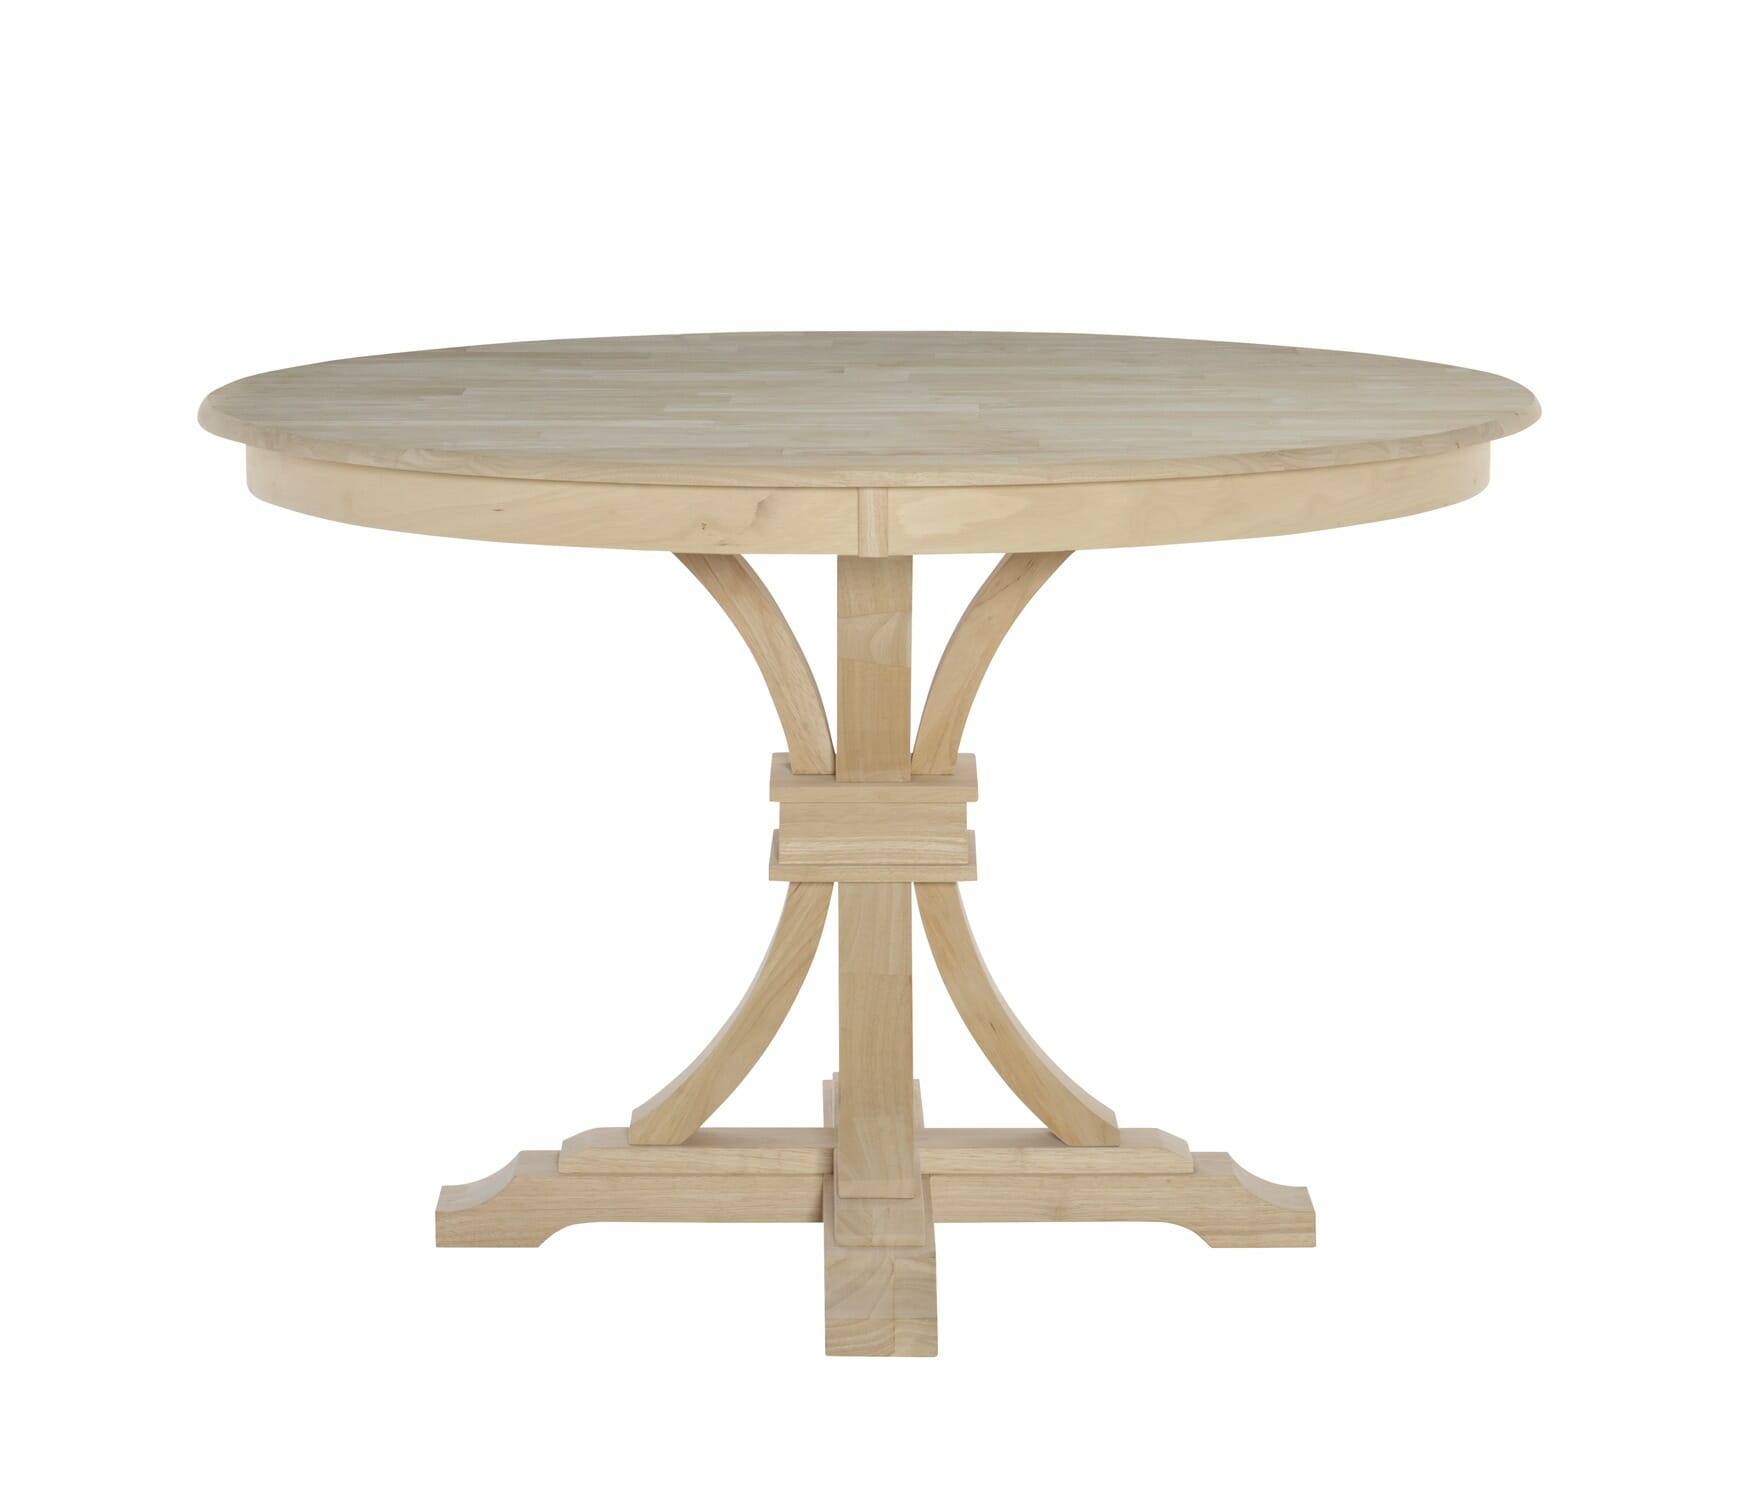 T 48rt 48 Solid Round Create A Table, 48 Inch Round Oak Table Top